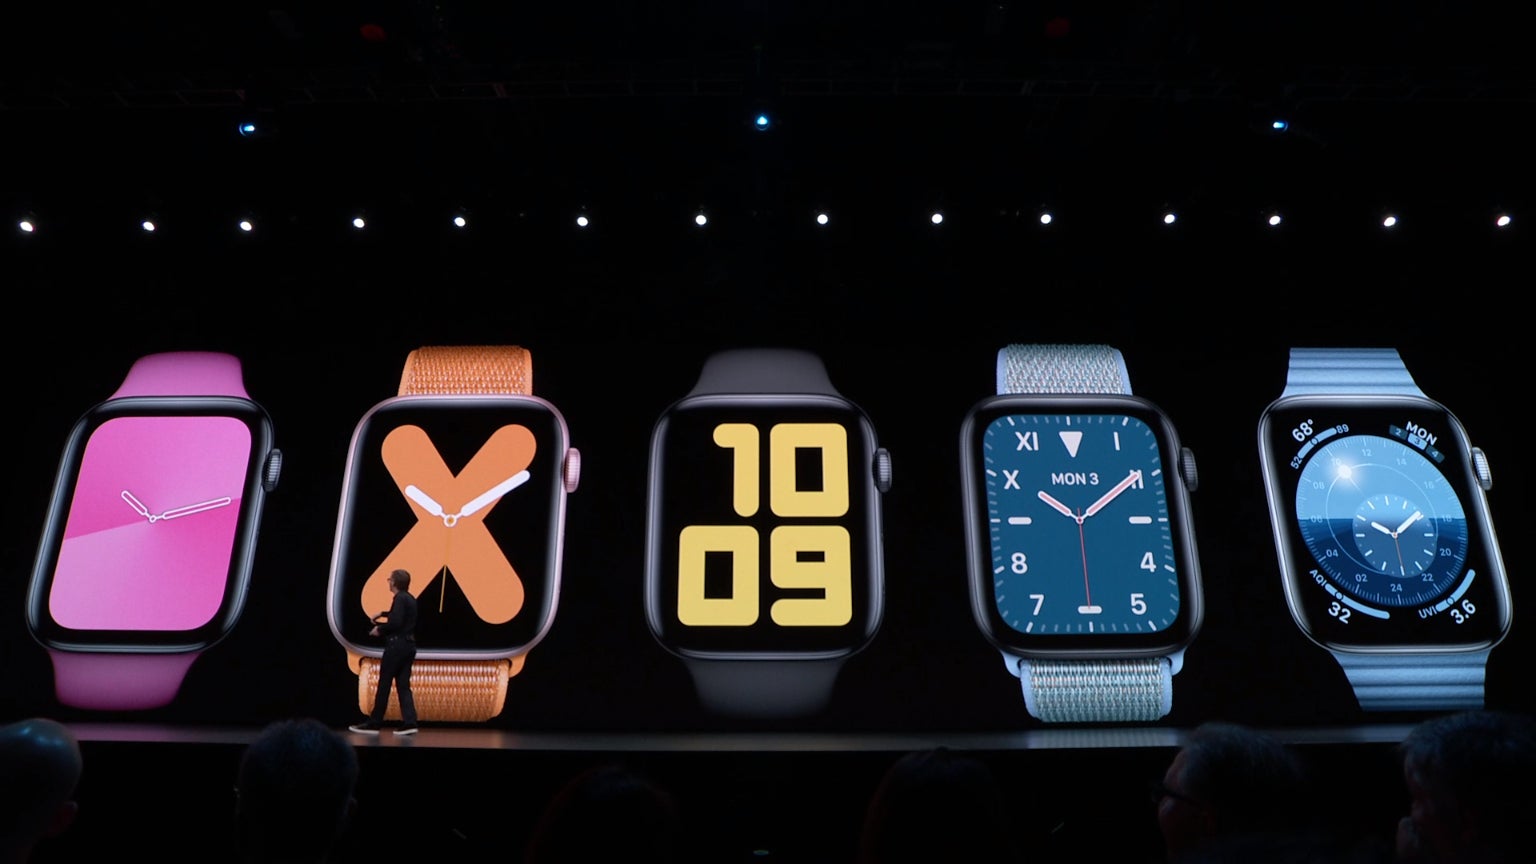 Apple's new watchOS 6 — App Store on the Watch, Loudness warnings, and Fitness trends!